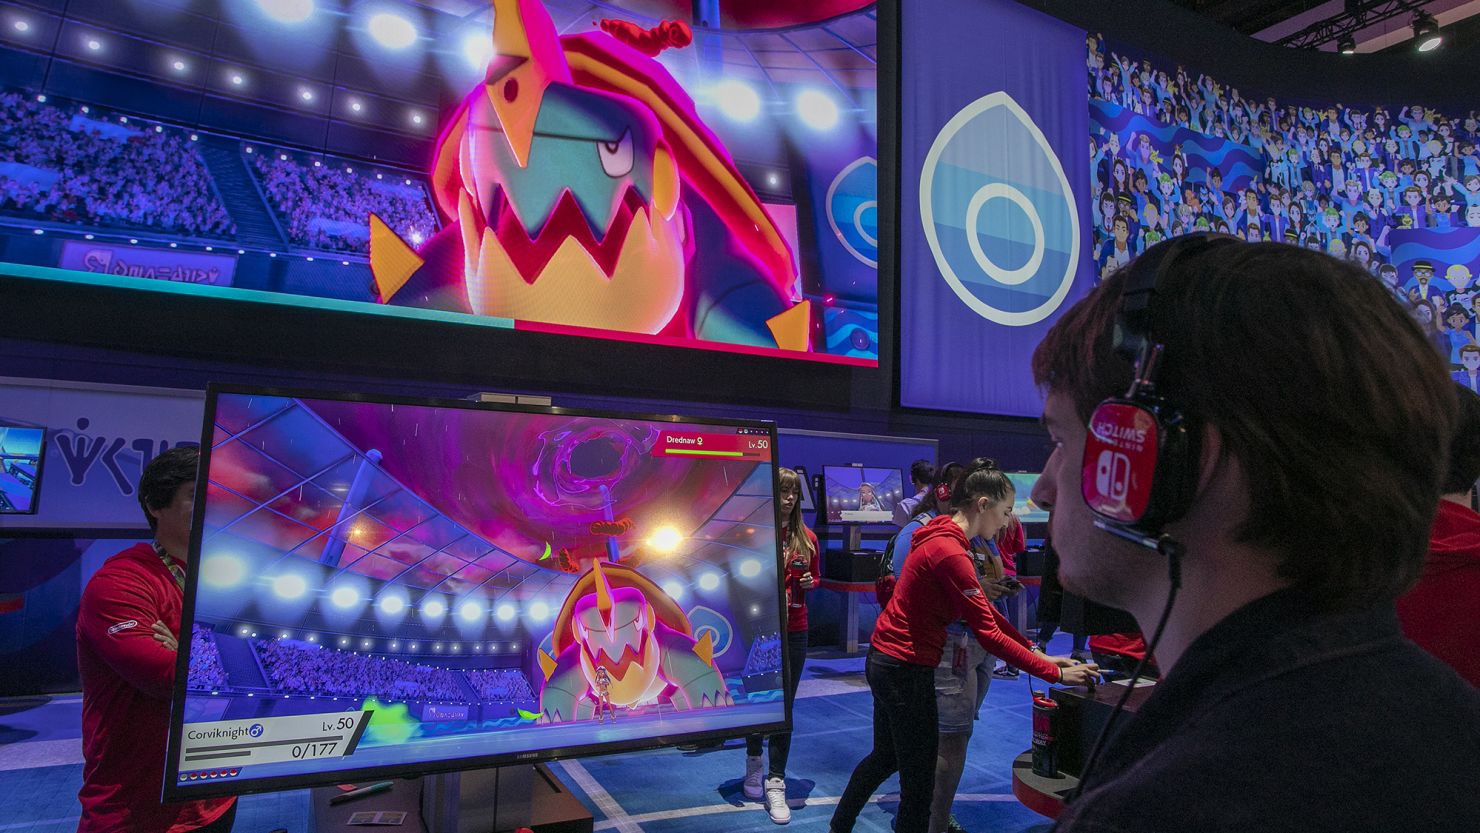 Top 10 Gaming Conventions in North America in 2023 - The Trade Group